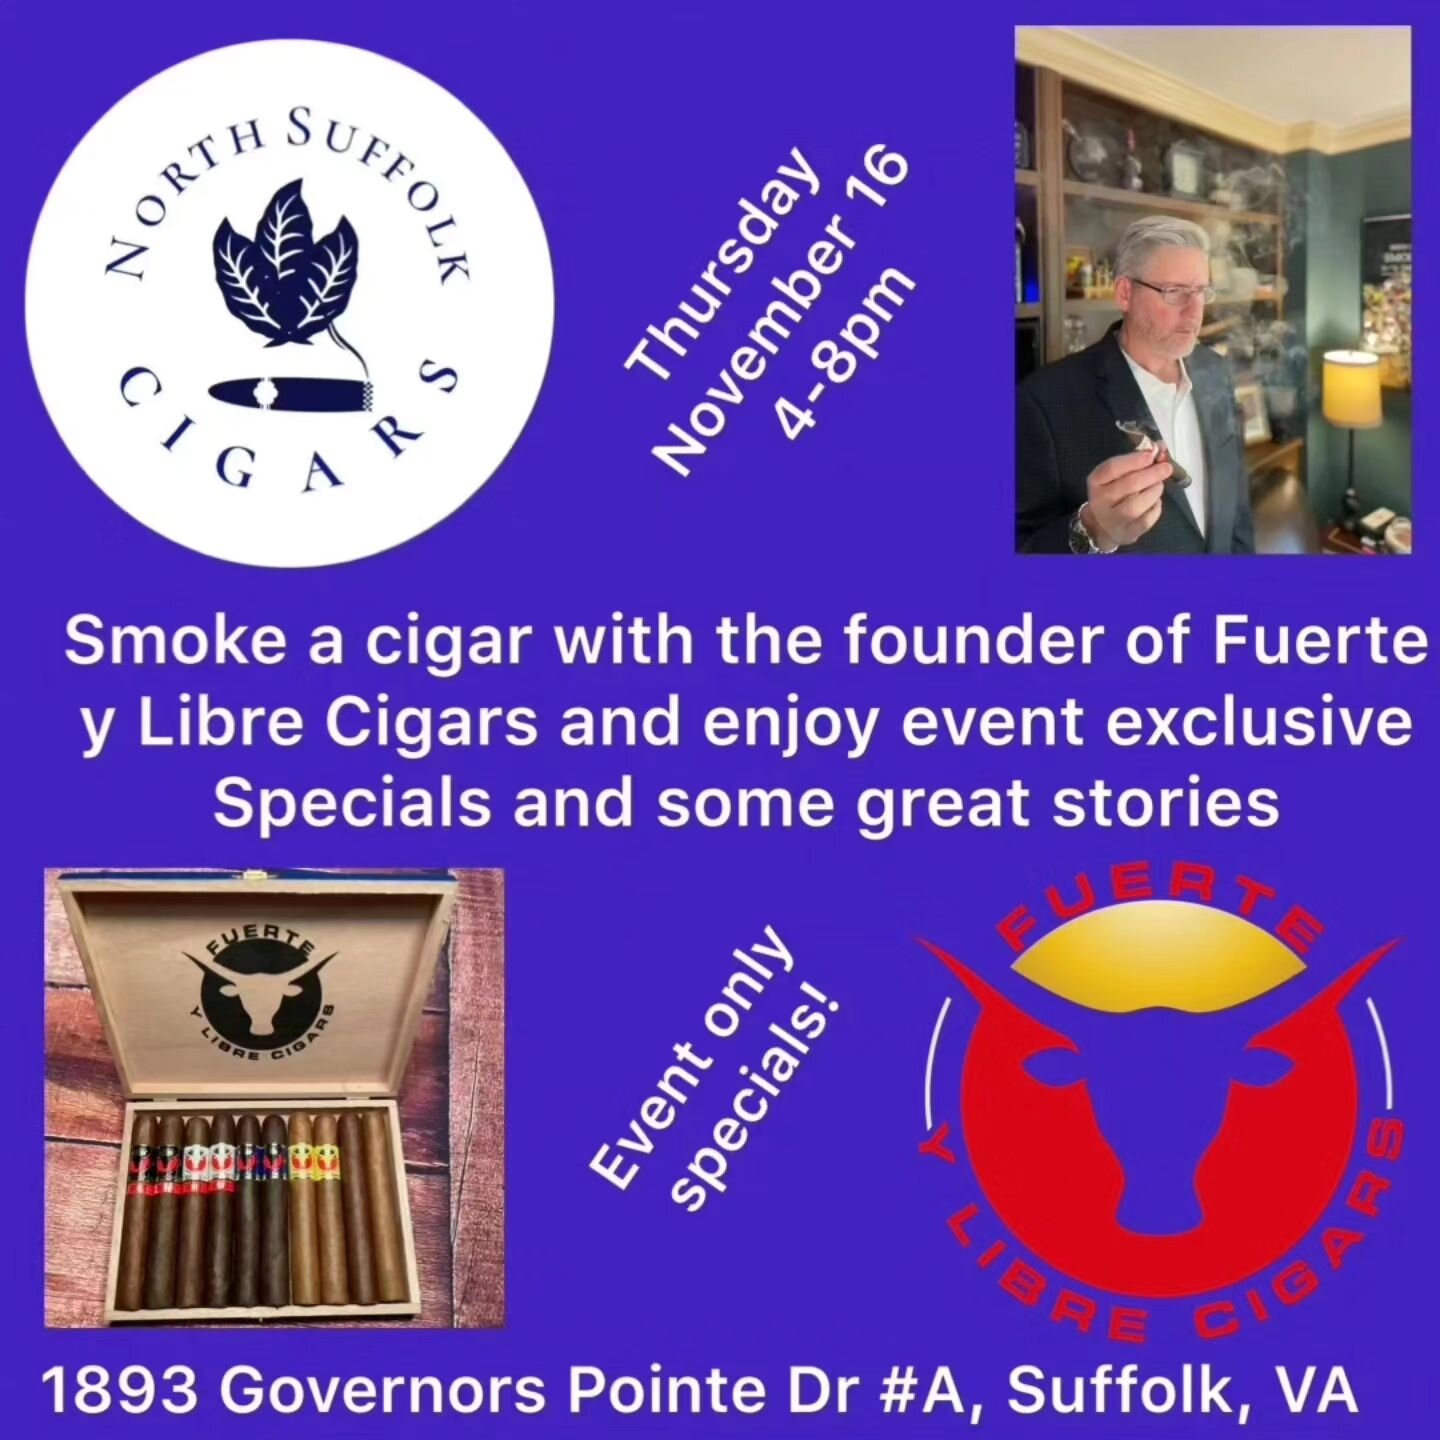 Event tonight stop by and see Greg &amp; Ed.
Smoke some great cigars. Stay for a wine tasting on the patio sponsored by North Suffolk Cigar Club.
#nowsmoking ##slickstickscigarclub #sailorsandsticks #northsuffolkcigars #ashholecigarclub #goodtimegang